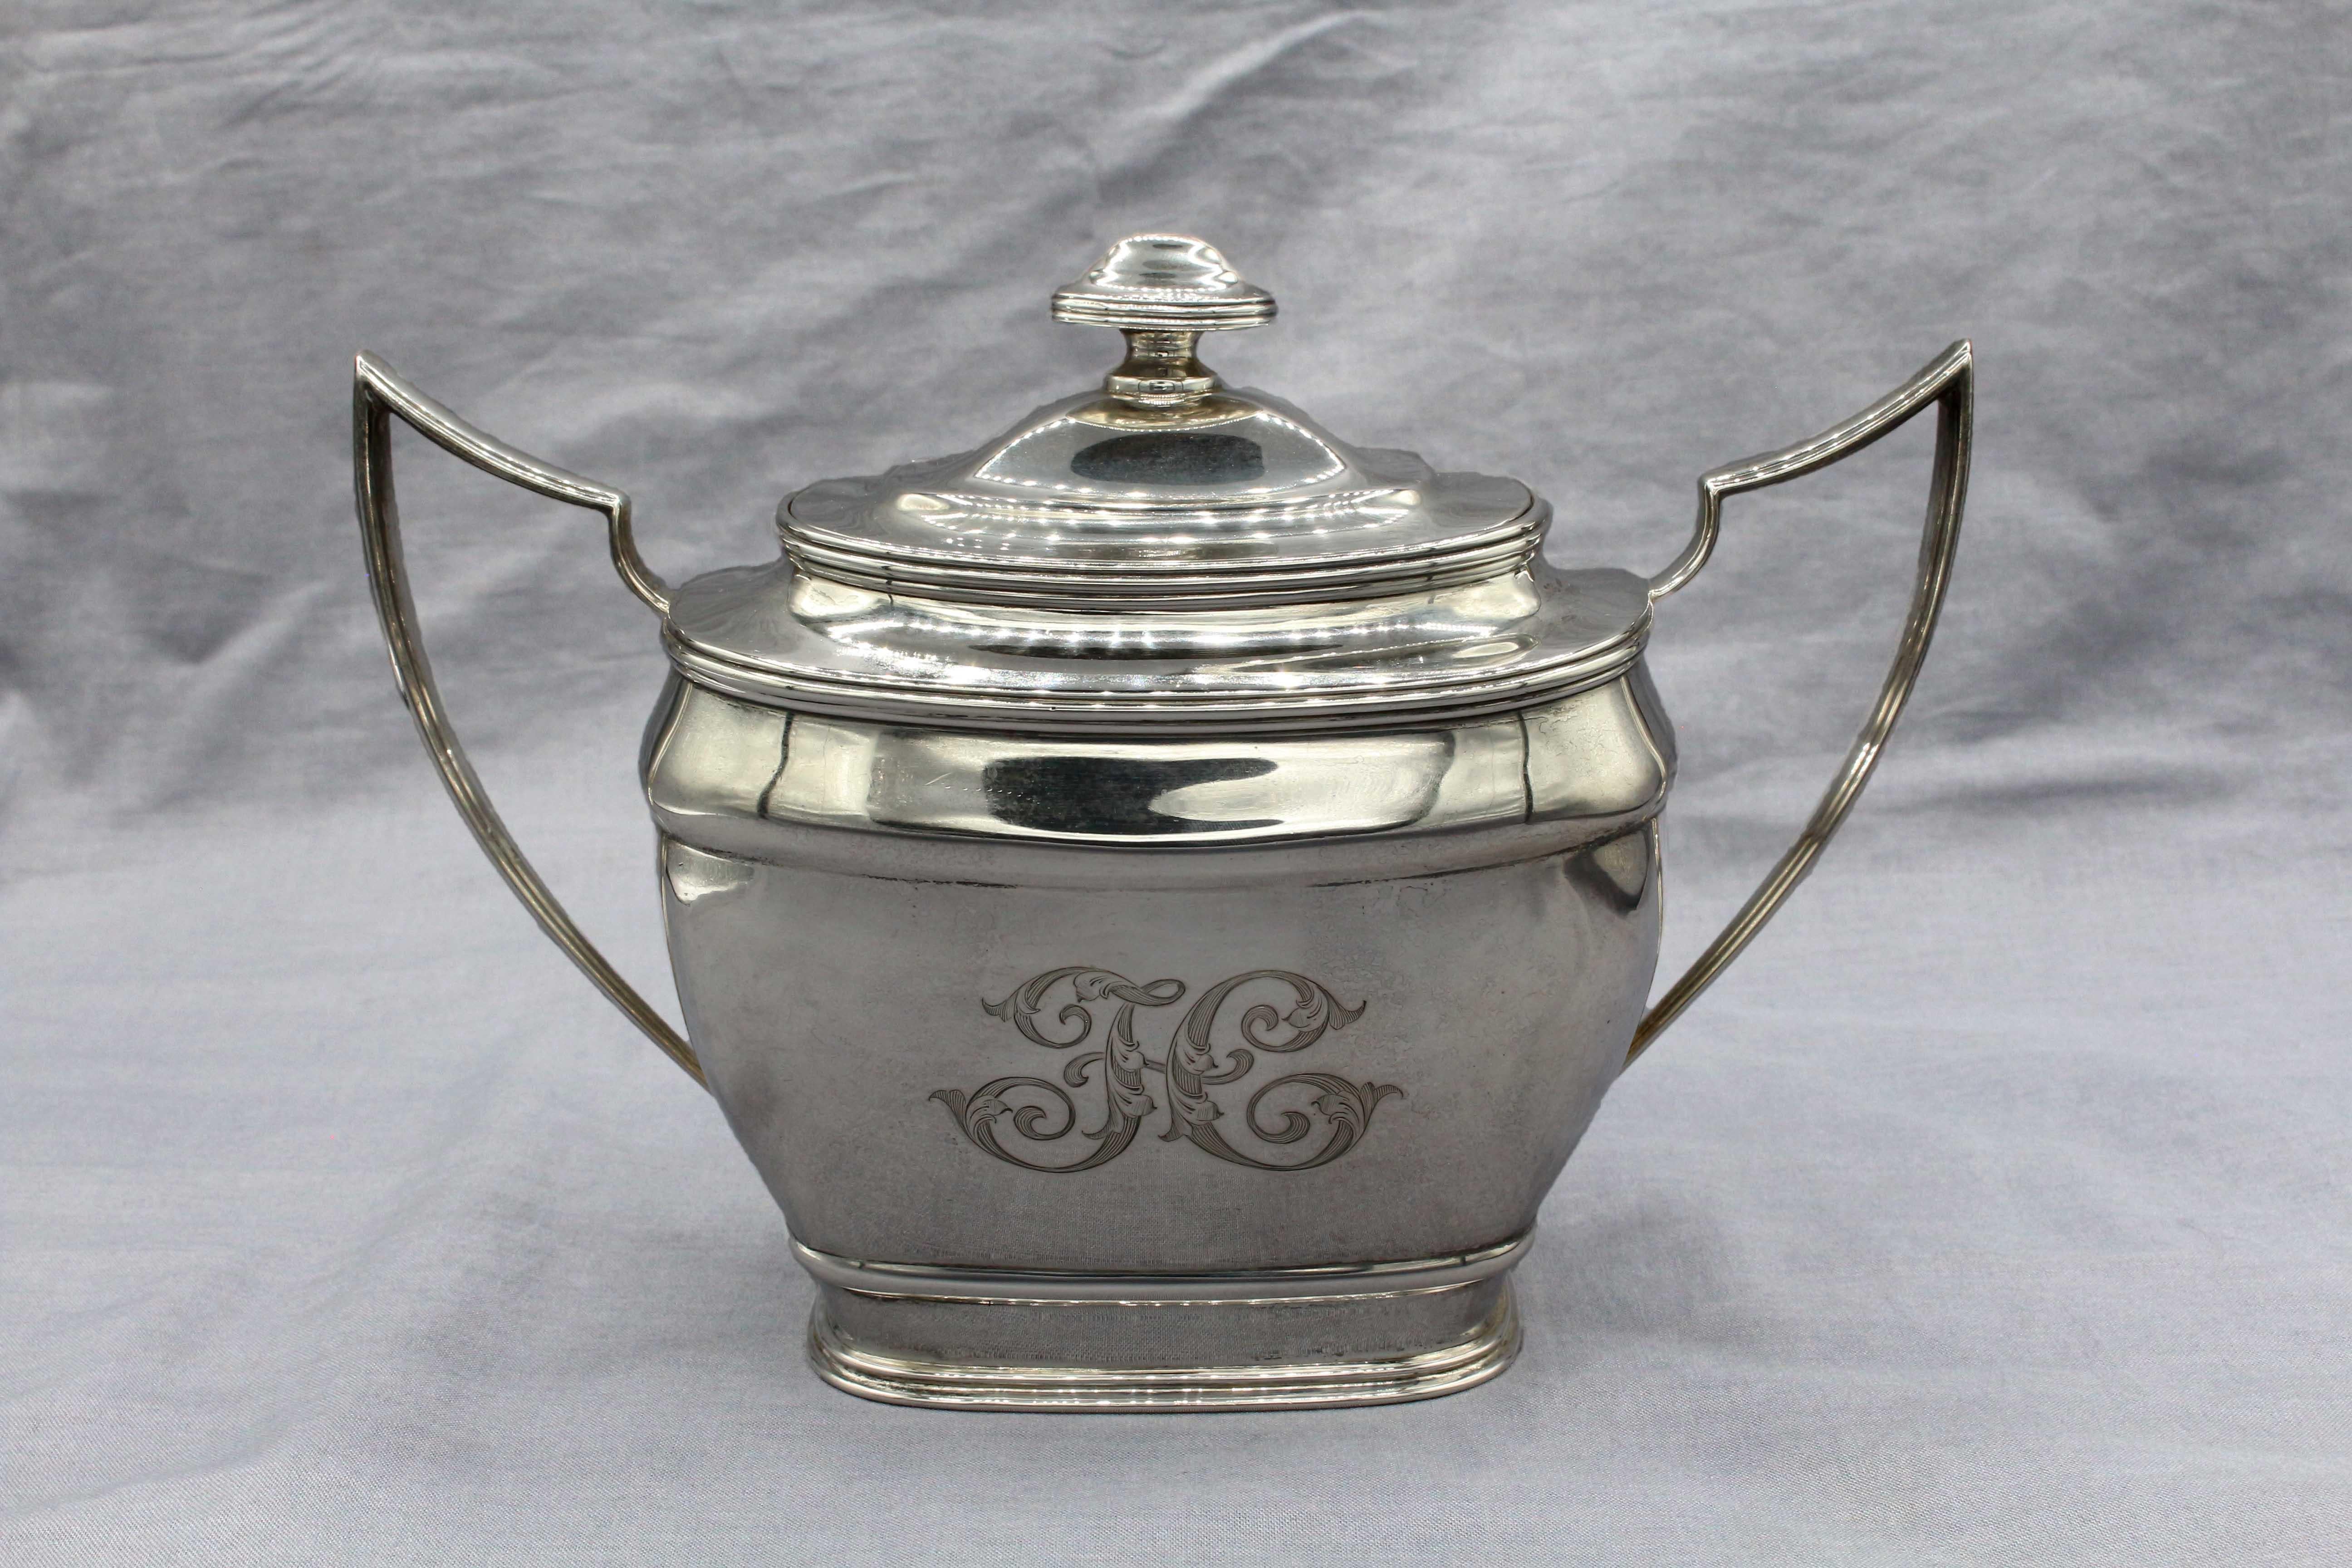 20th Century Sterling Silver 3-Piece Tea Set by Towle, circa 1900-30